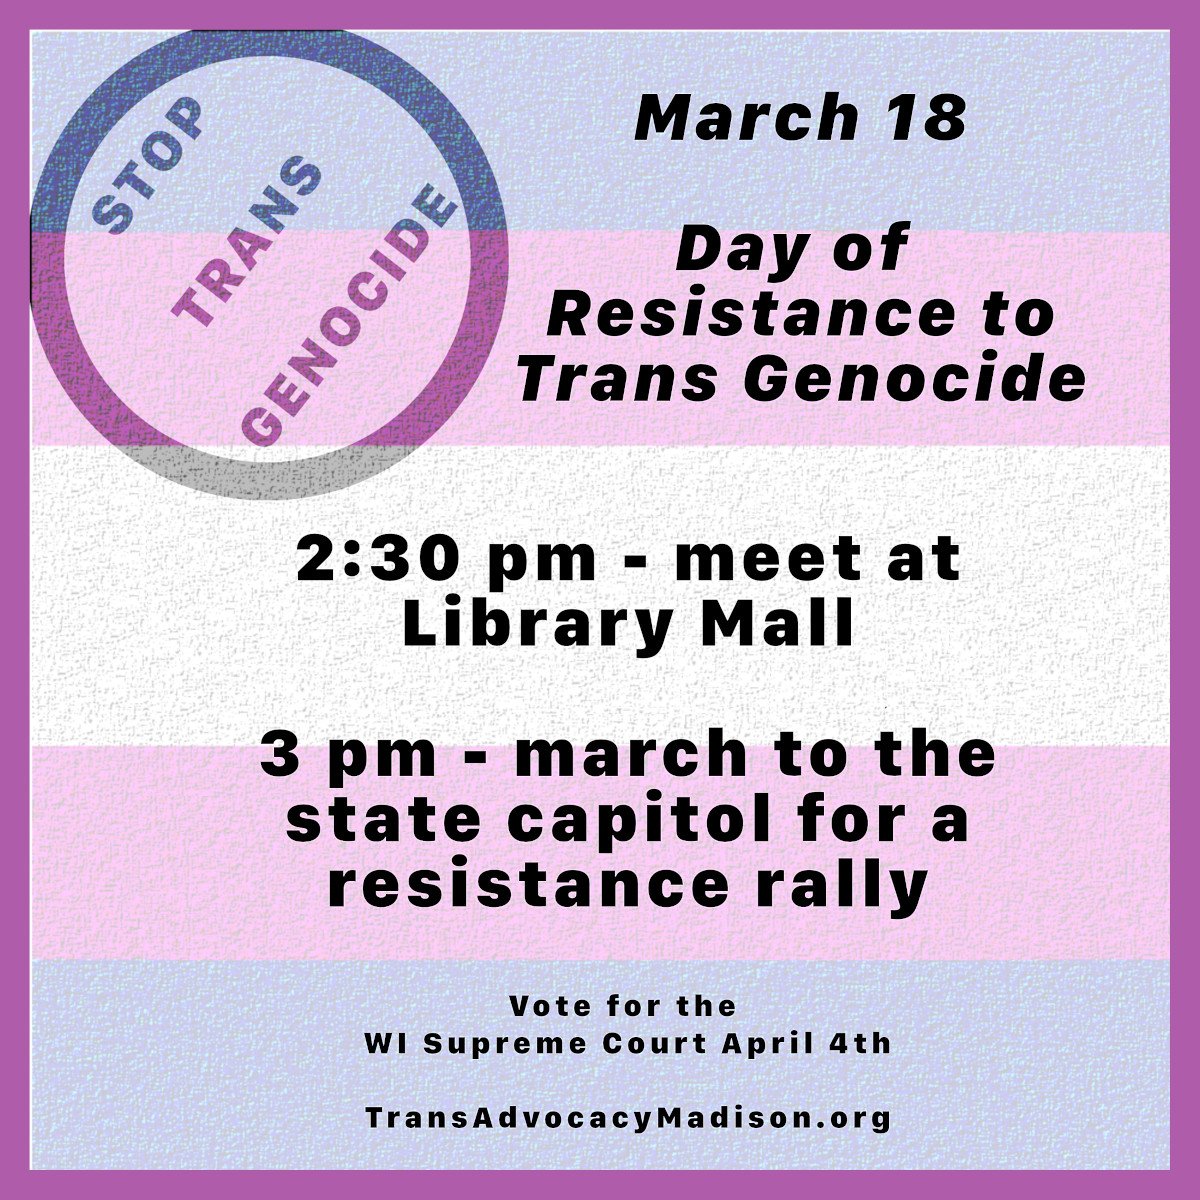 Day of Resistance to Trans Genocide